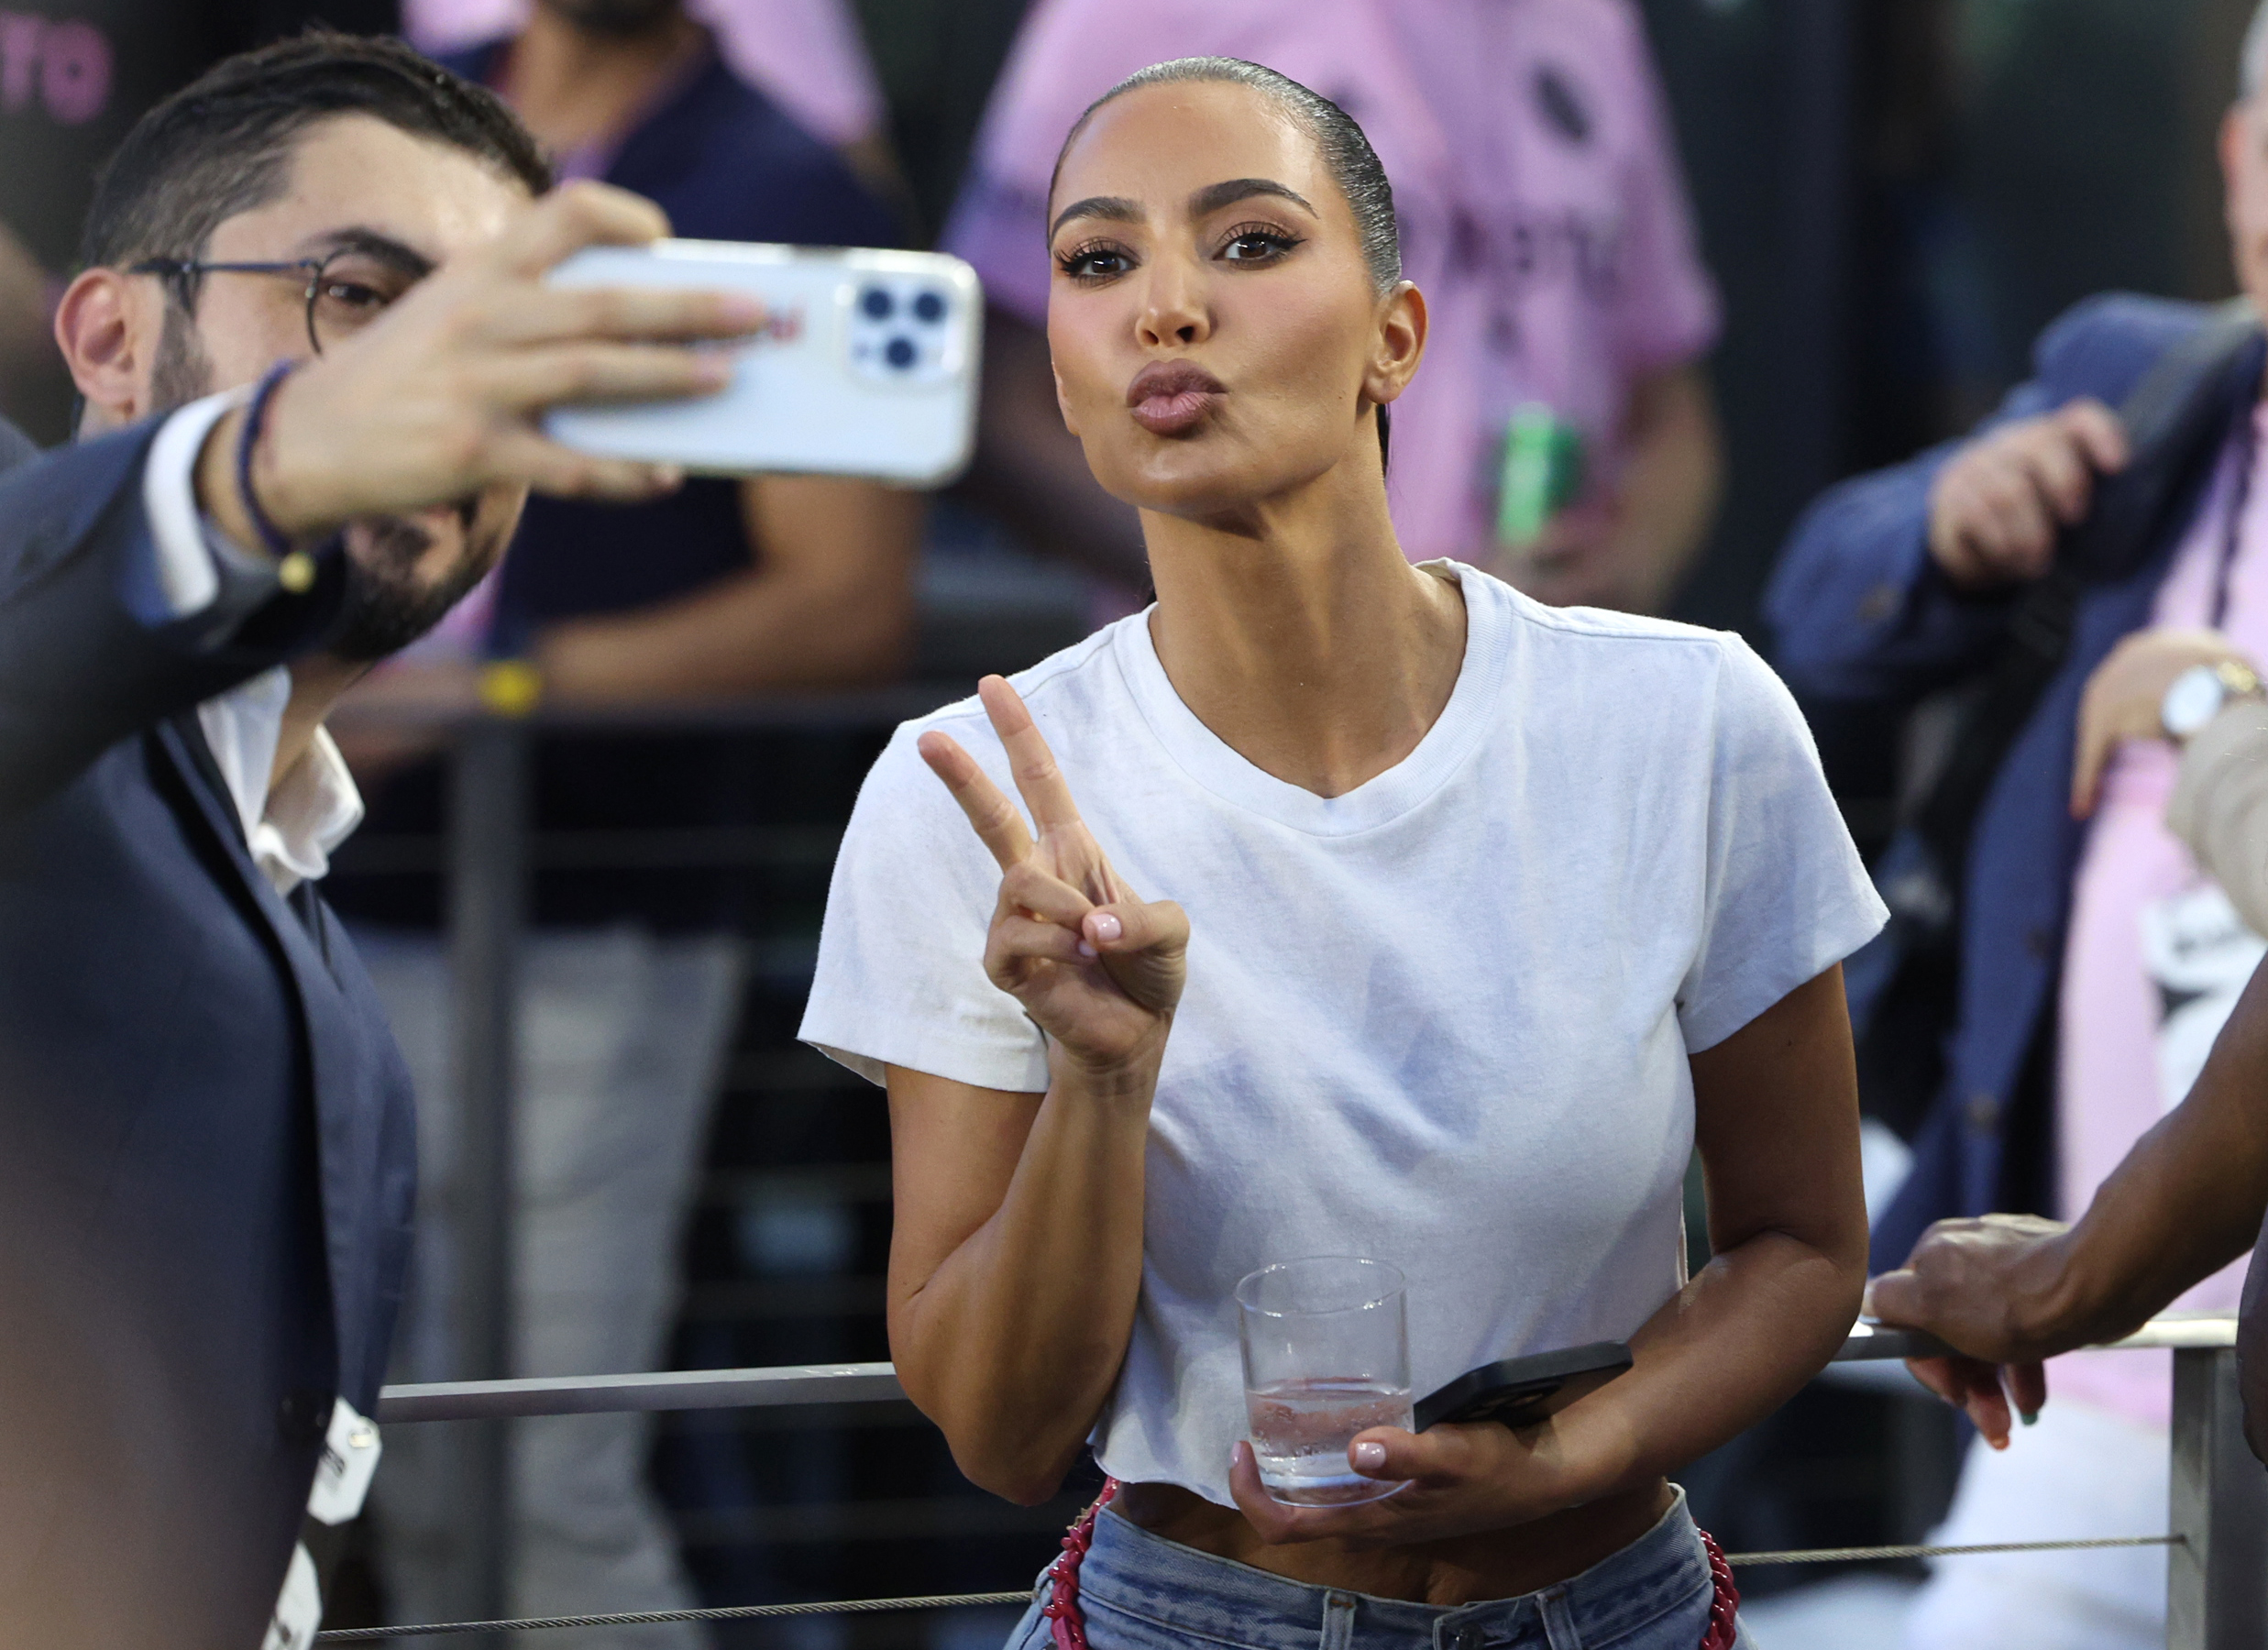 Kim Kardashian's SKIMS Launches NIL Campaign with College Basketball Stars  - Sports Illustrated NIL on FanNation News, Analysis and More